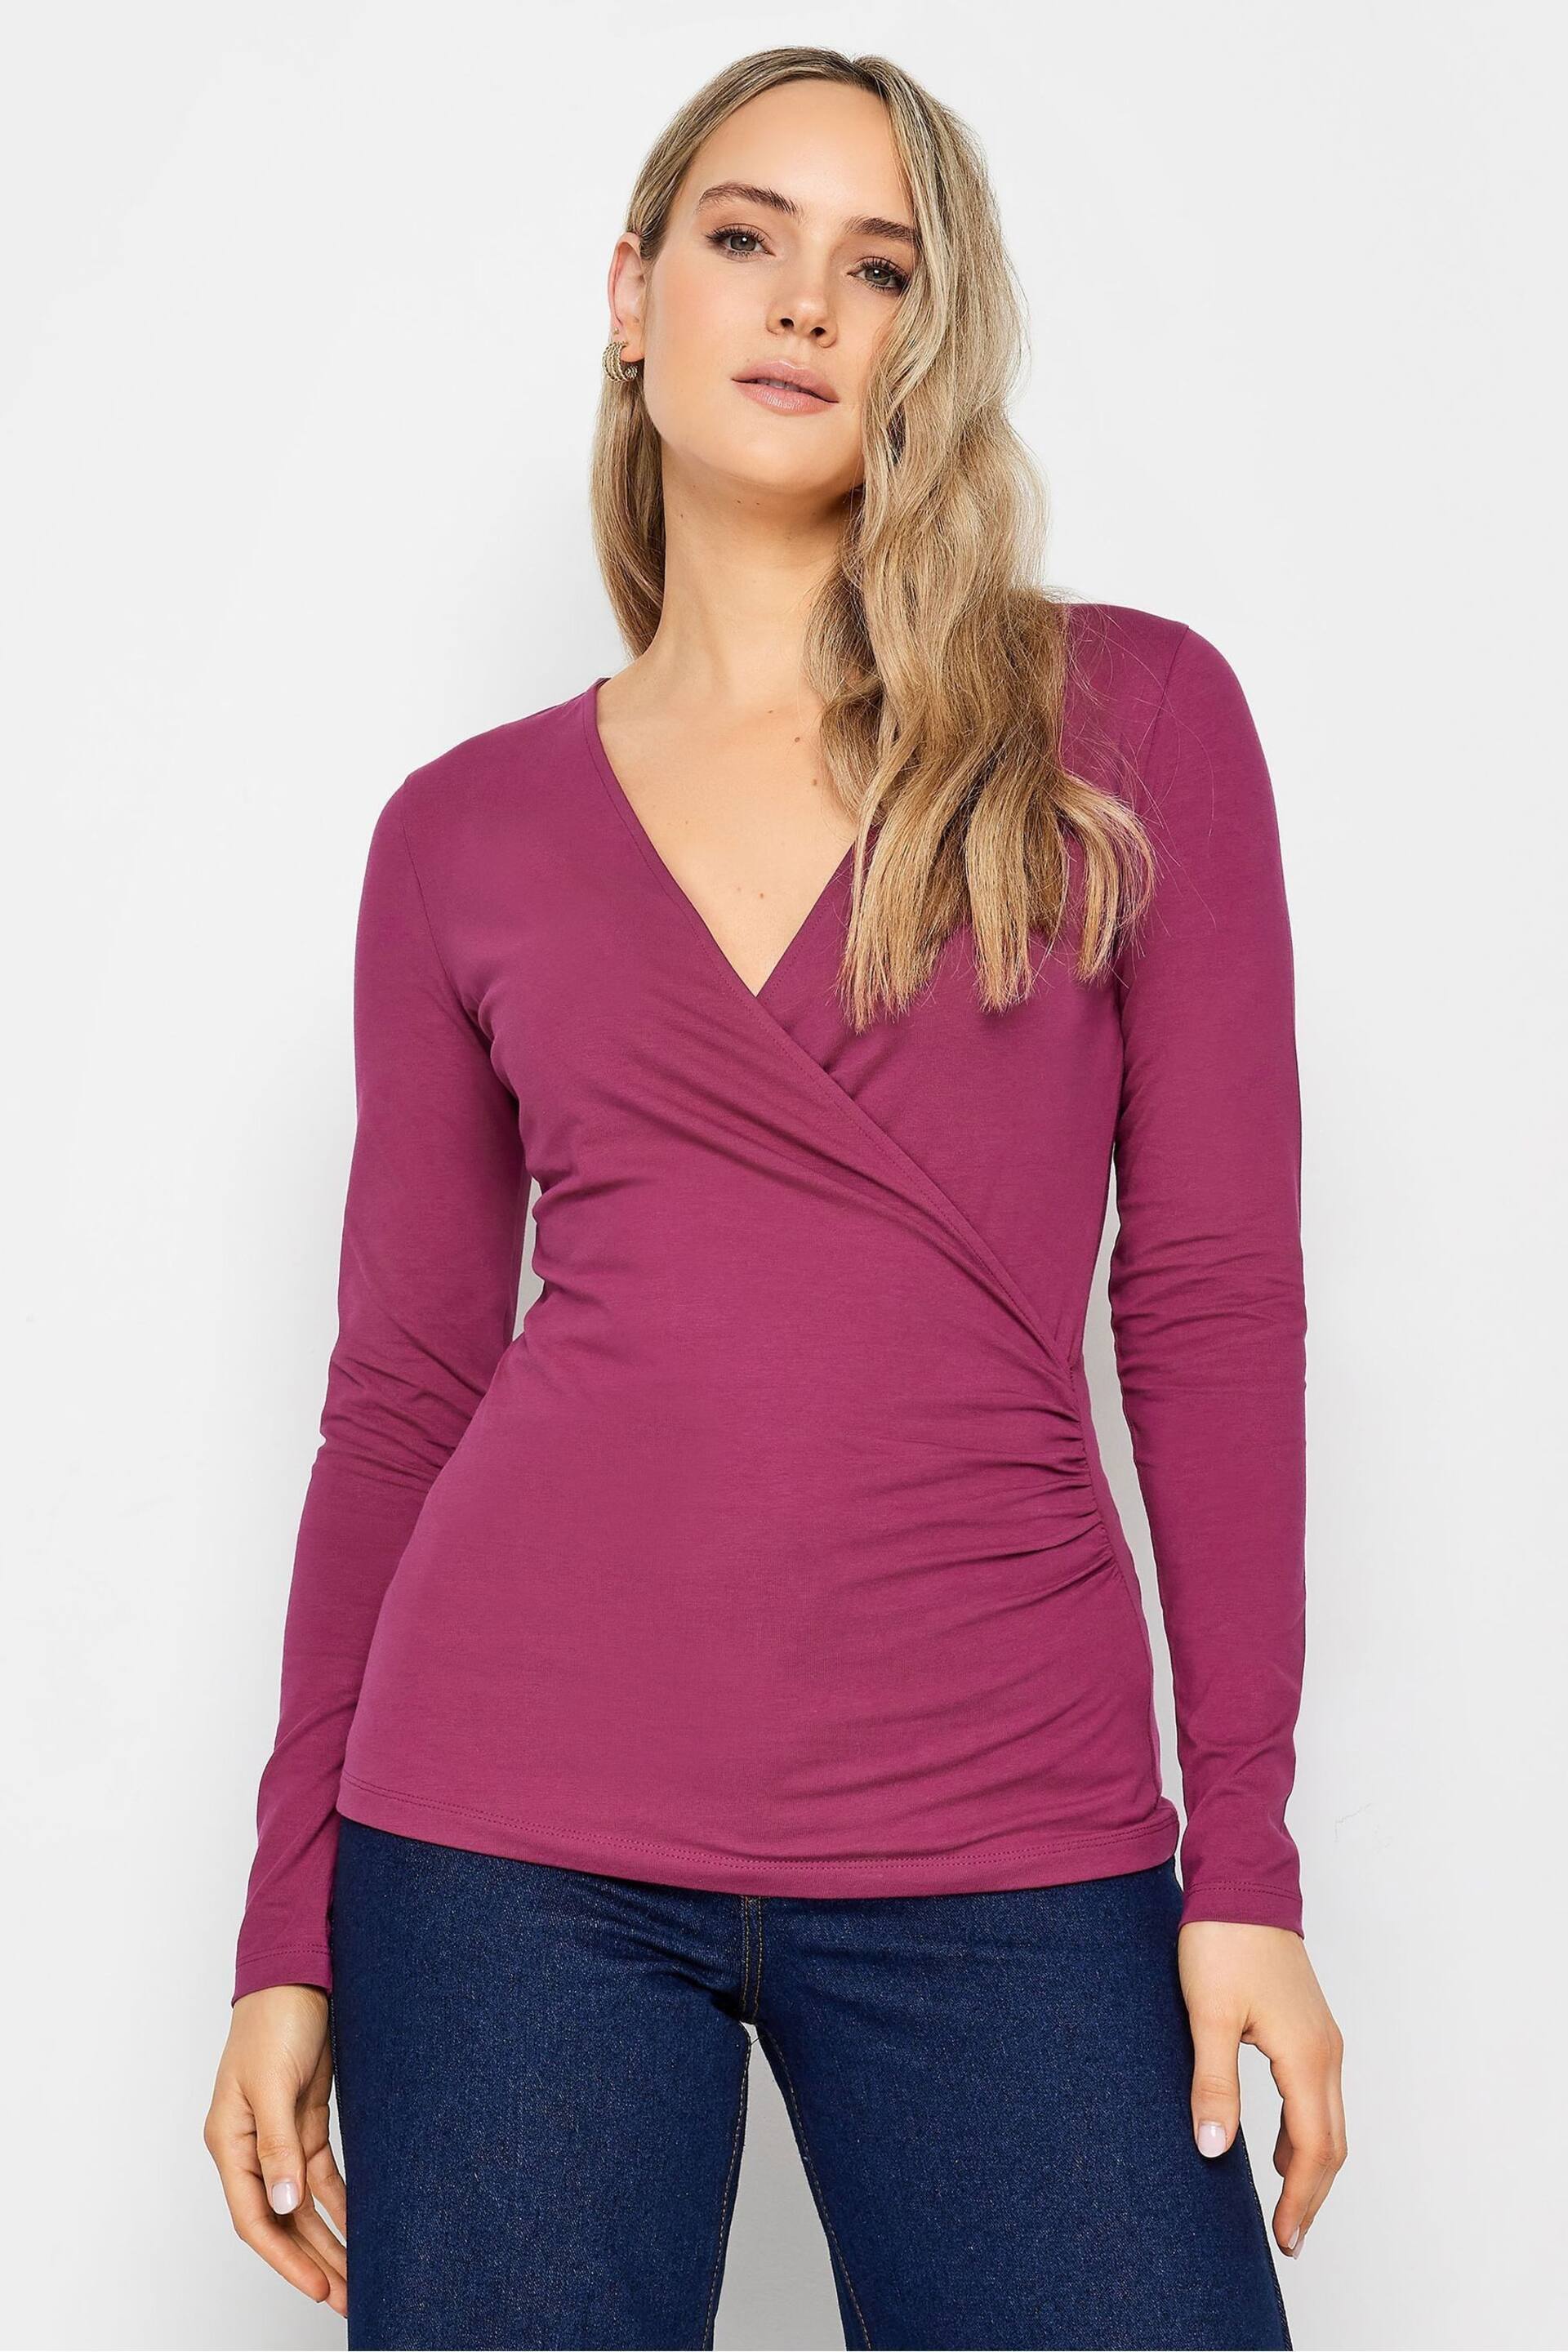 Long Tall Sally Pink Jersey Wrap Top - Image 1 of 3